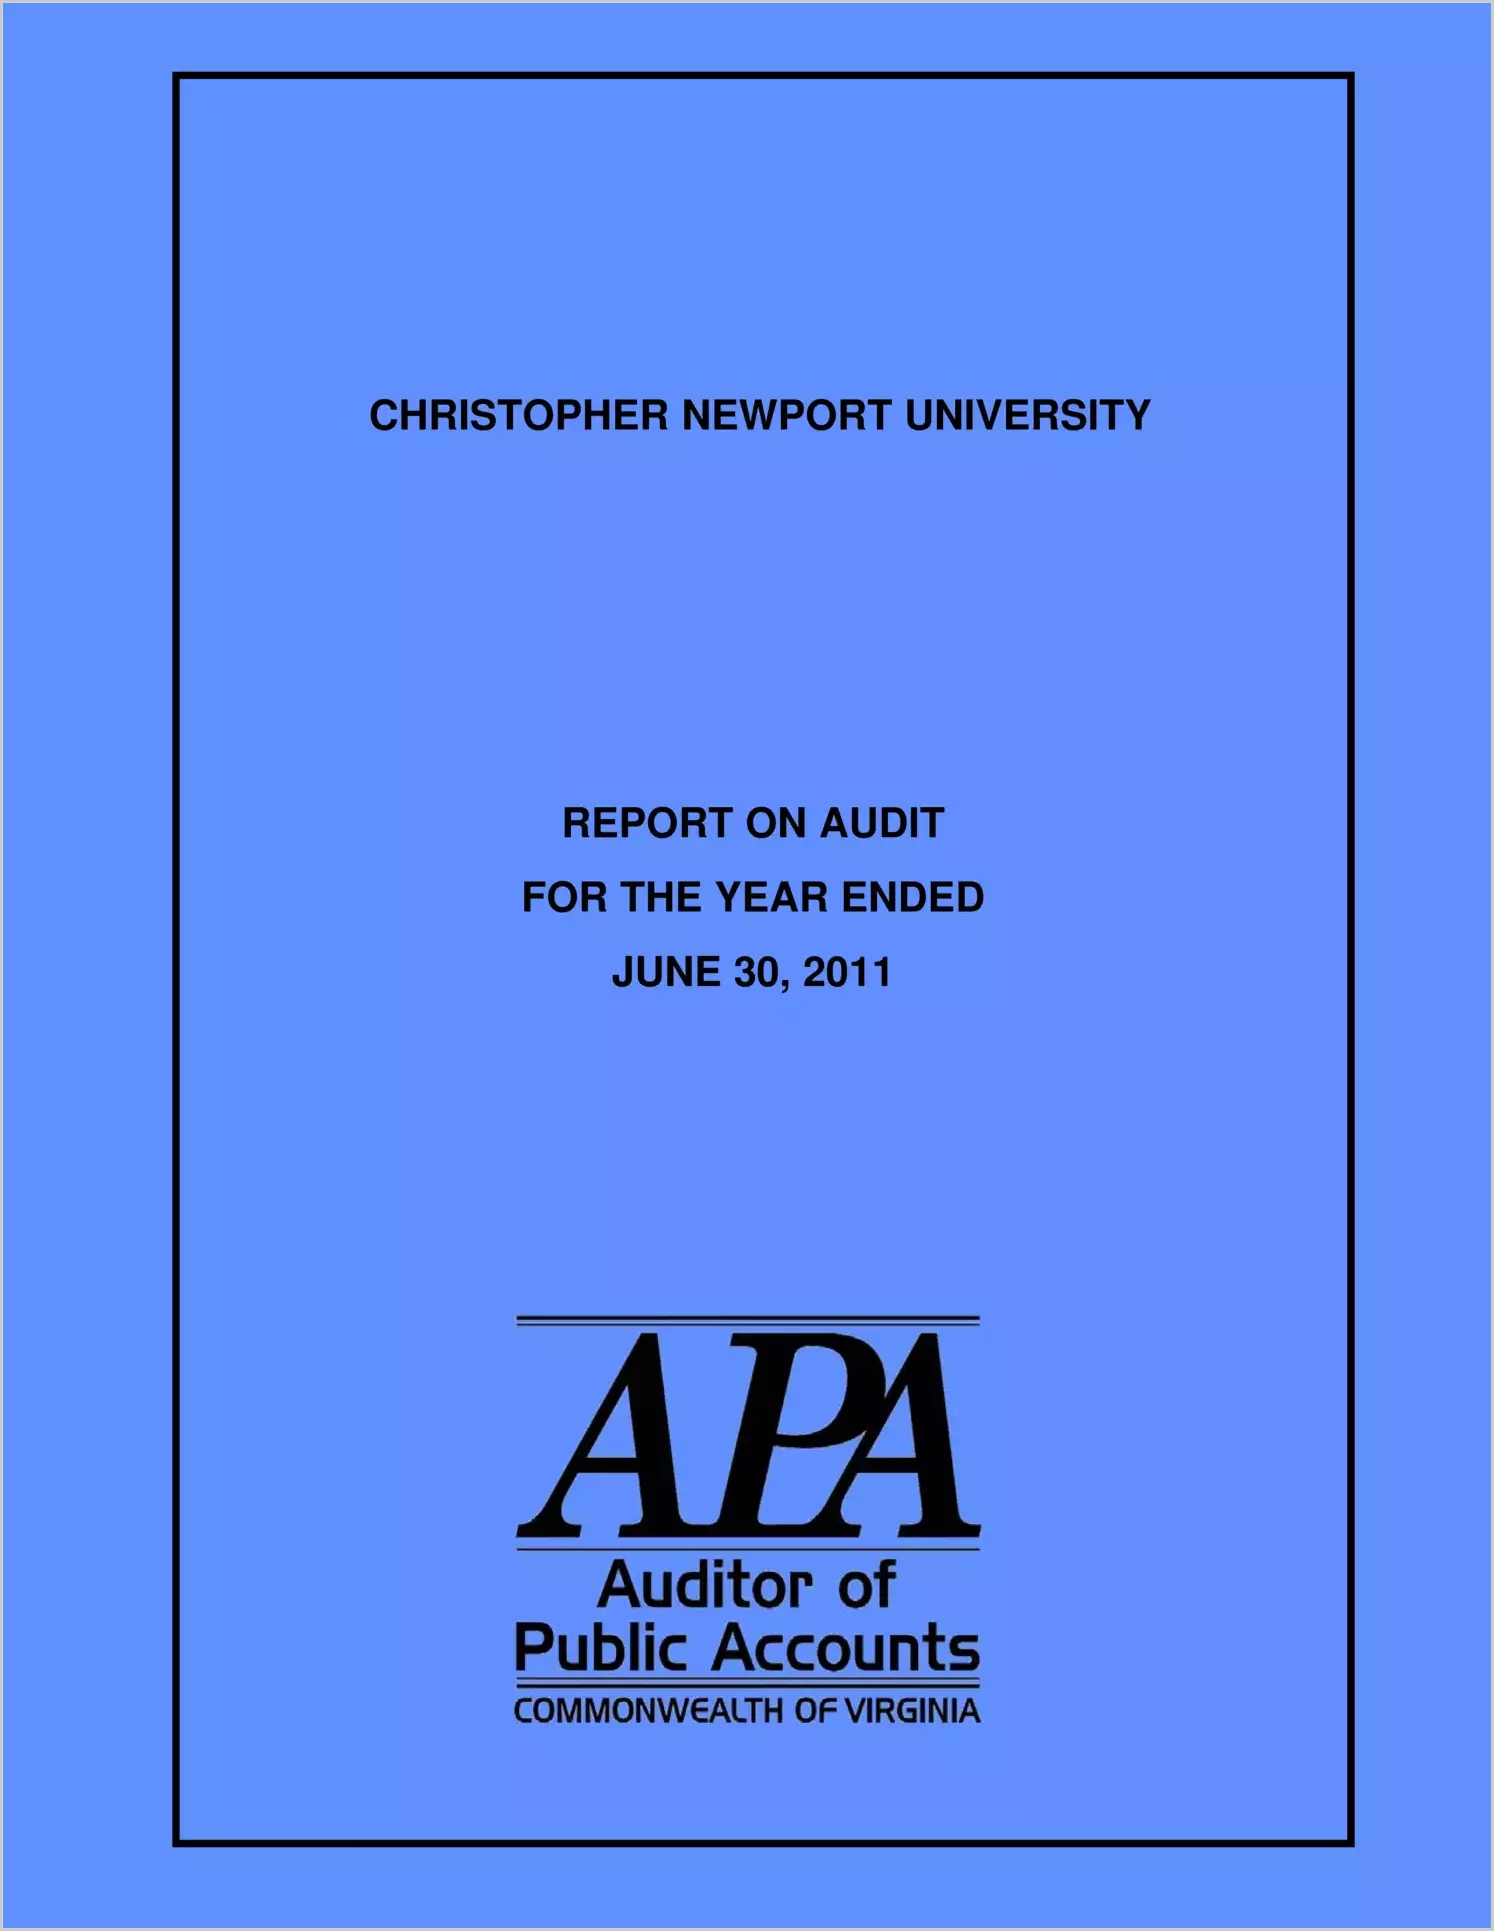 Christopher Newport University for the year ended June 30, 2011